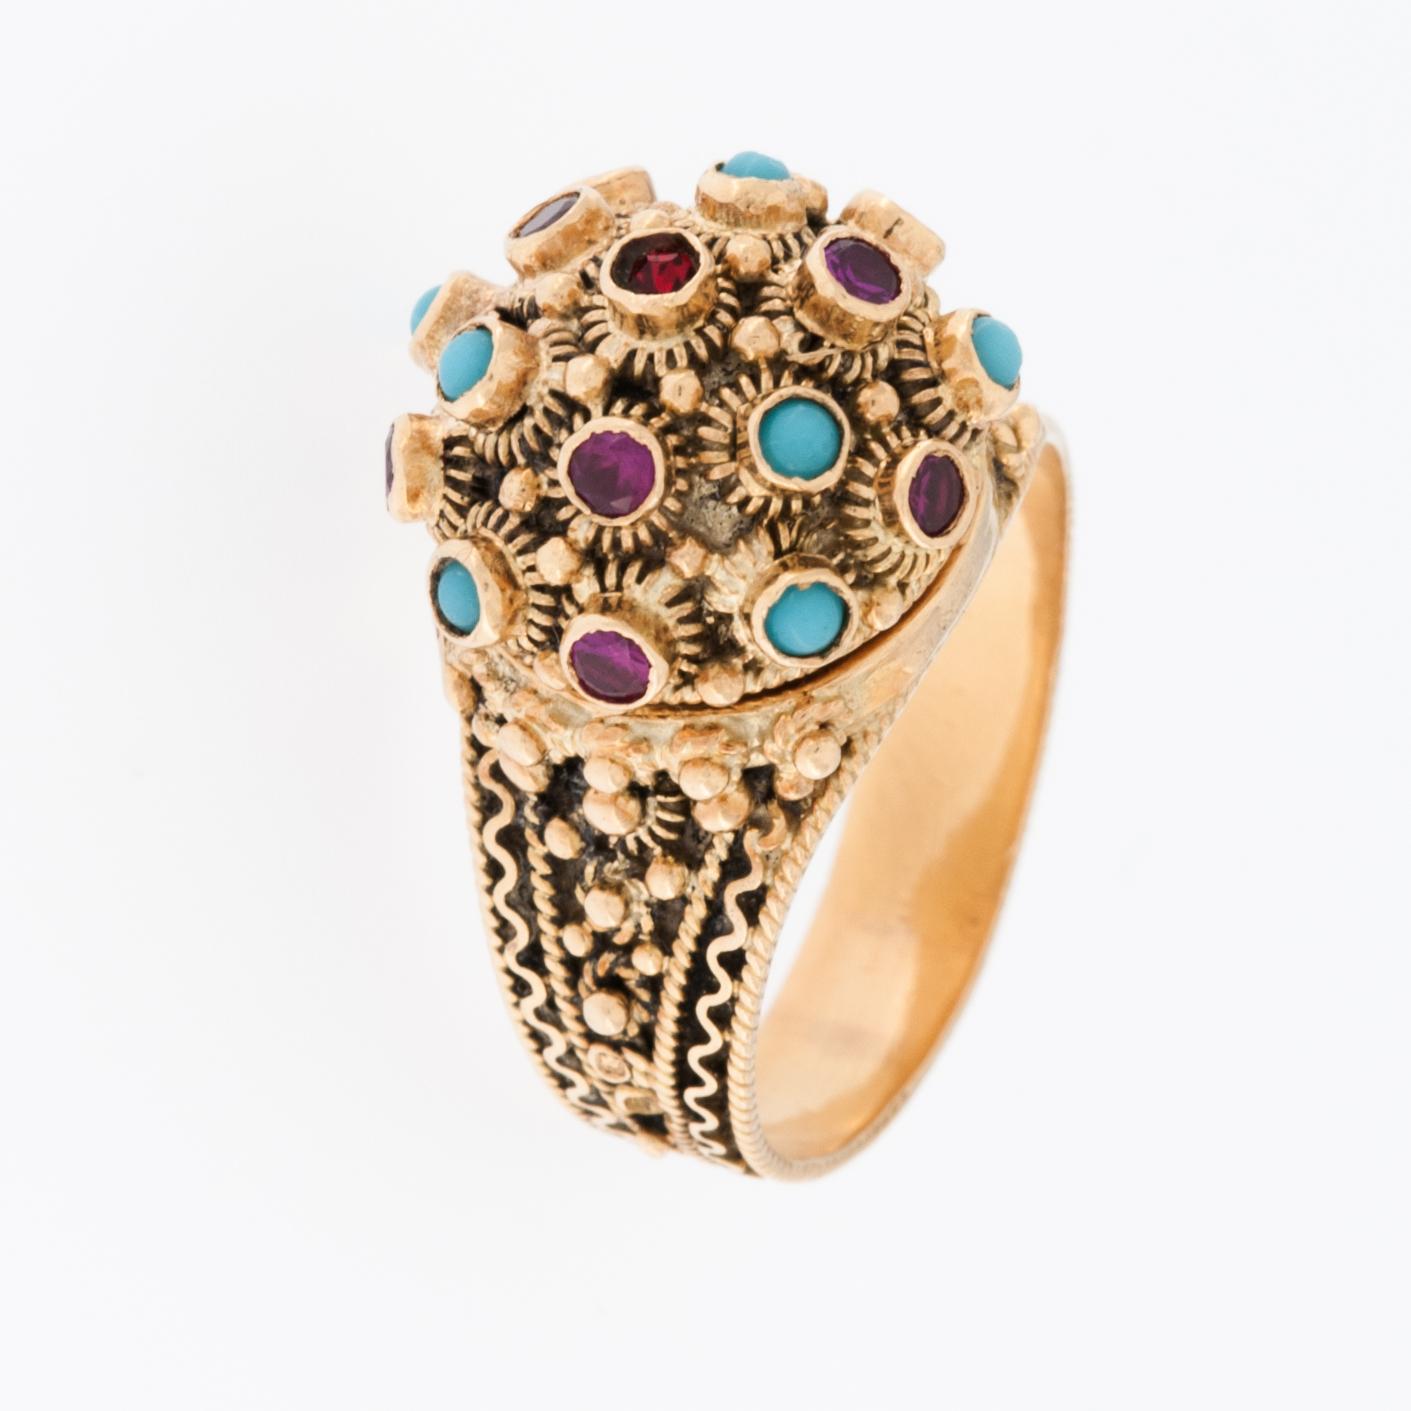 The Turquoise and Ruby Stone 19 Karat Yellow Gold Ring is a stunning, rare and intricately crafted piece of jewelry. 

Turquoise is a semi-precious gemstone known for its beautiful blue-green color, often associated with tranquility and